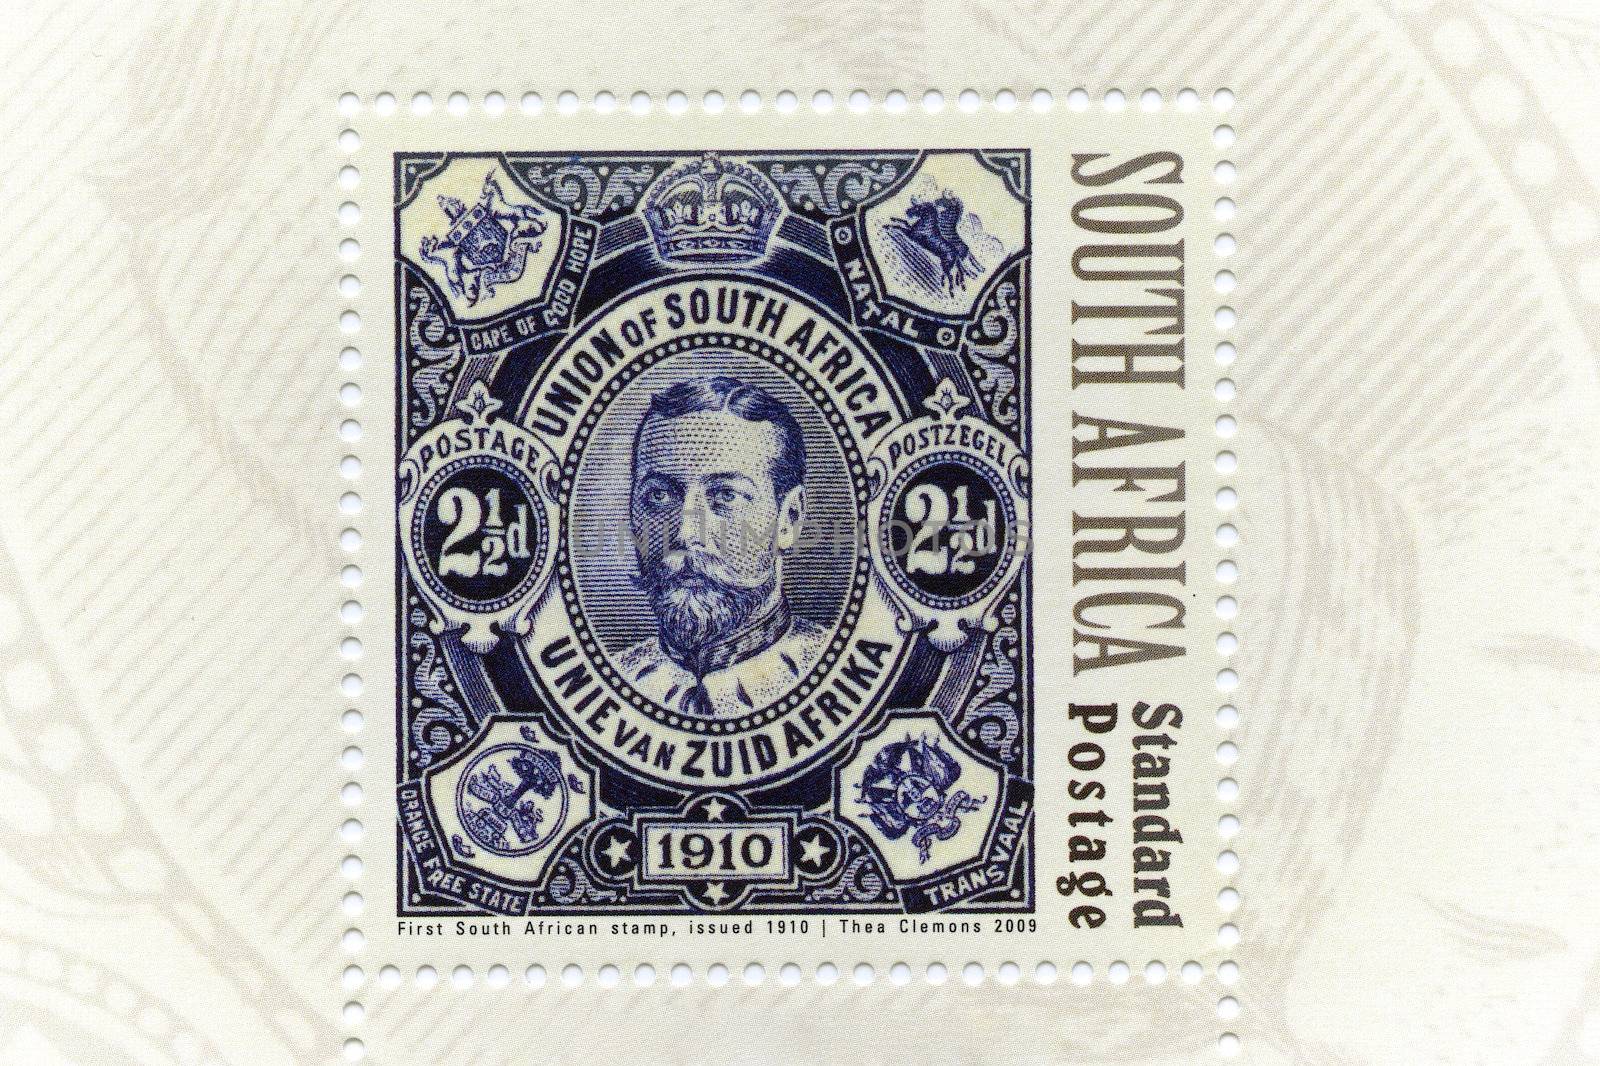 First South Africa stamp, issued 1910, postage

SOUTH AFRICA - CIRCA 1910: A stamp printed by South Africa shows portrait of King and the Union of South Africa, circa 1910.